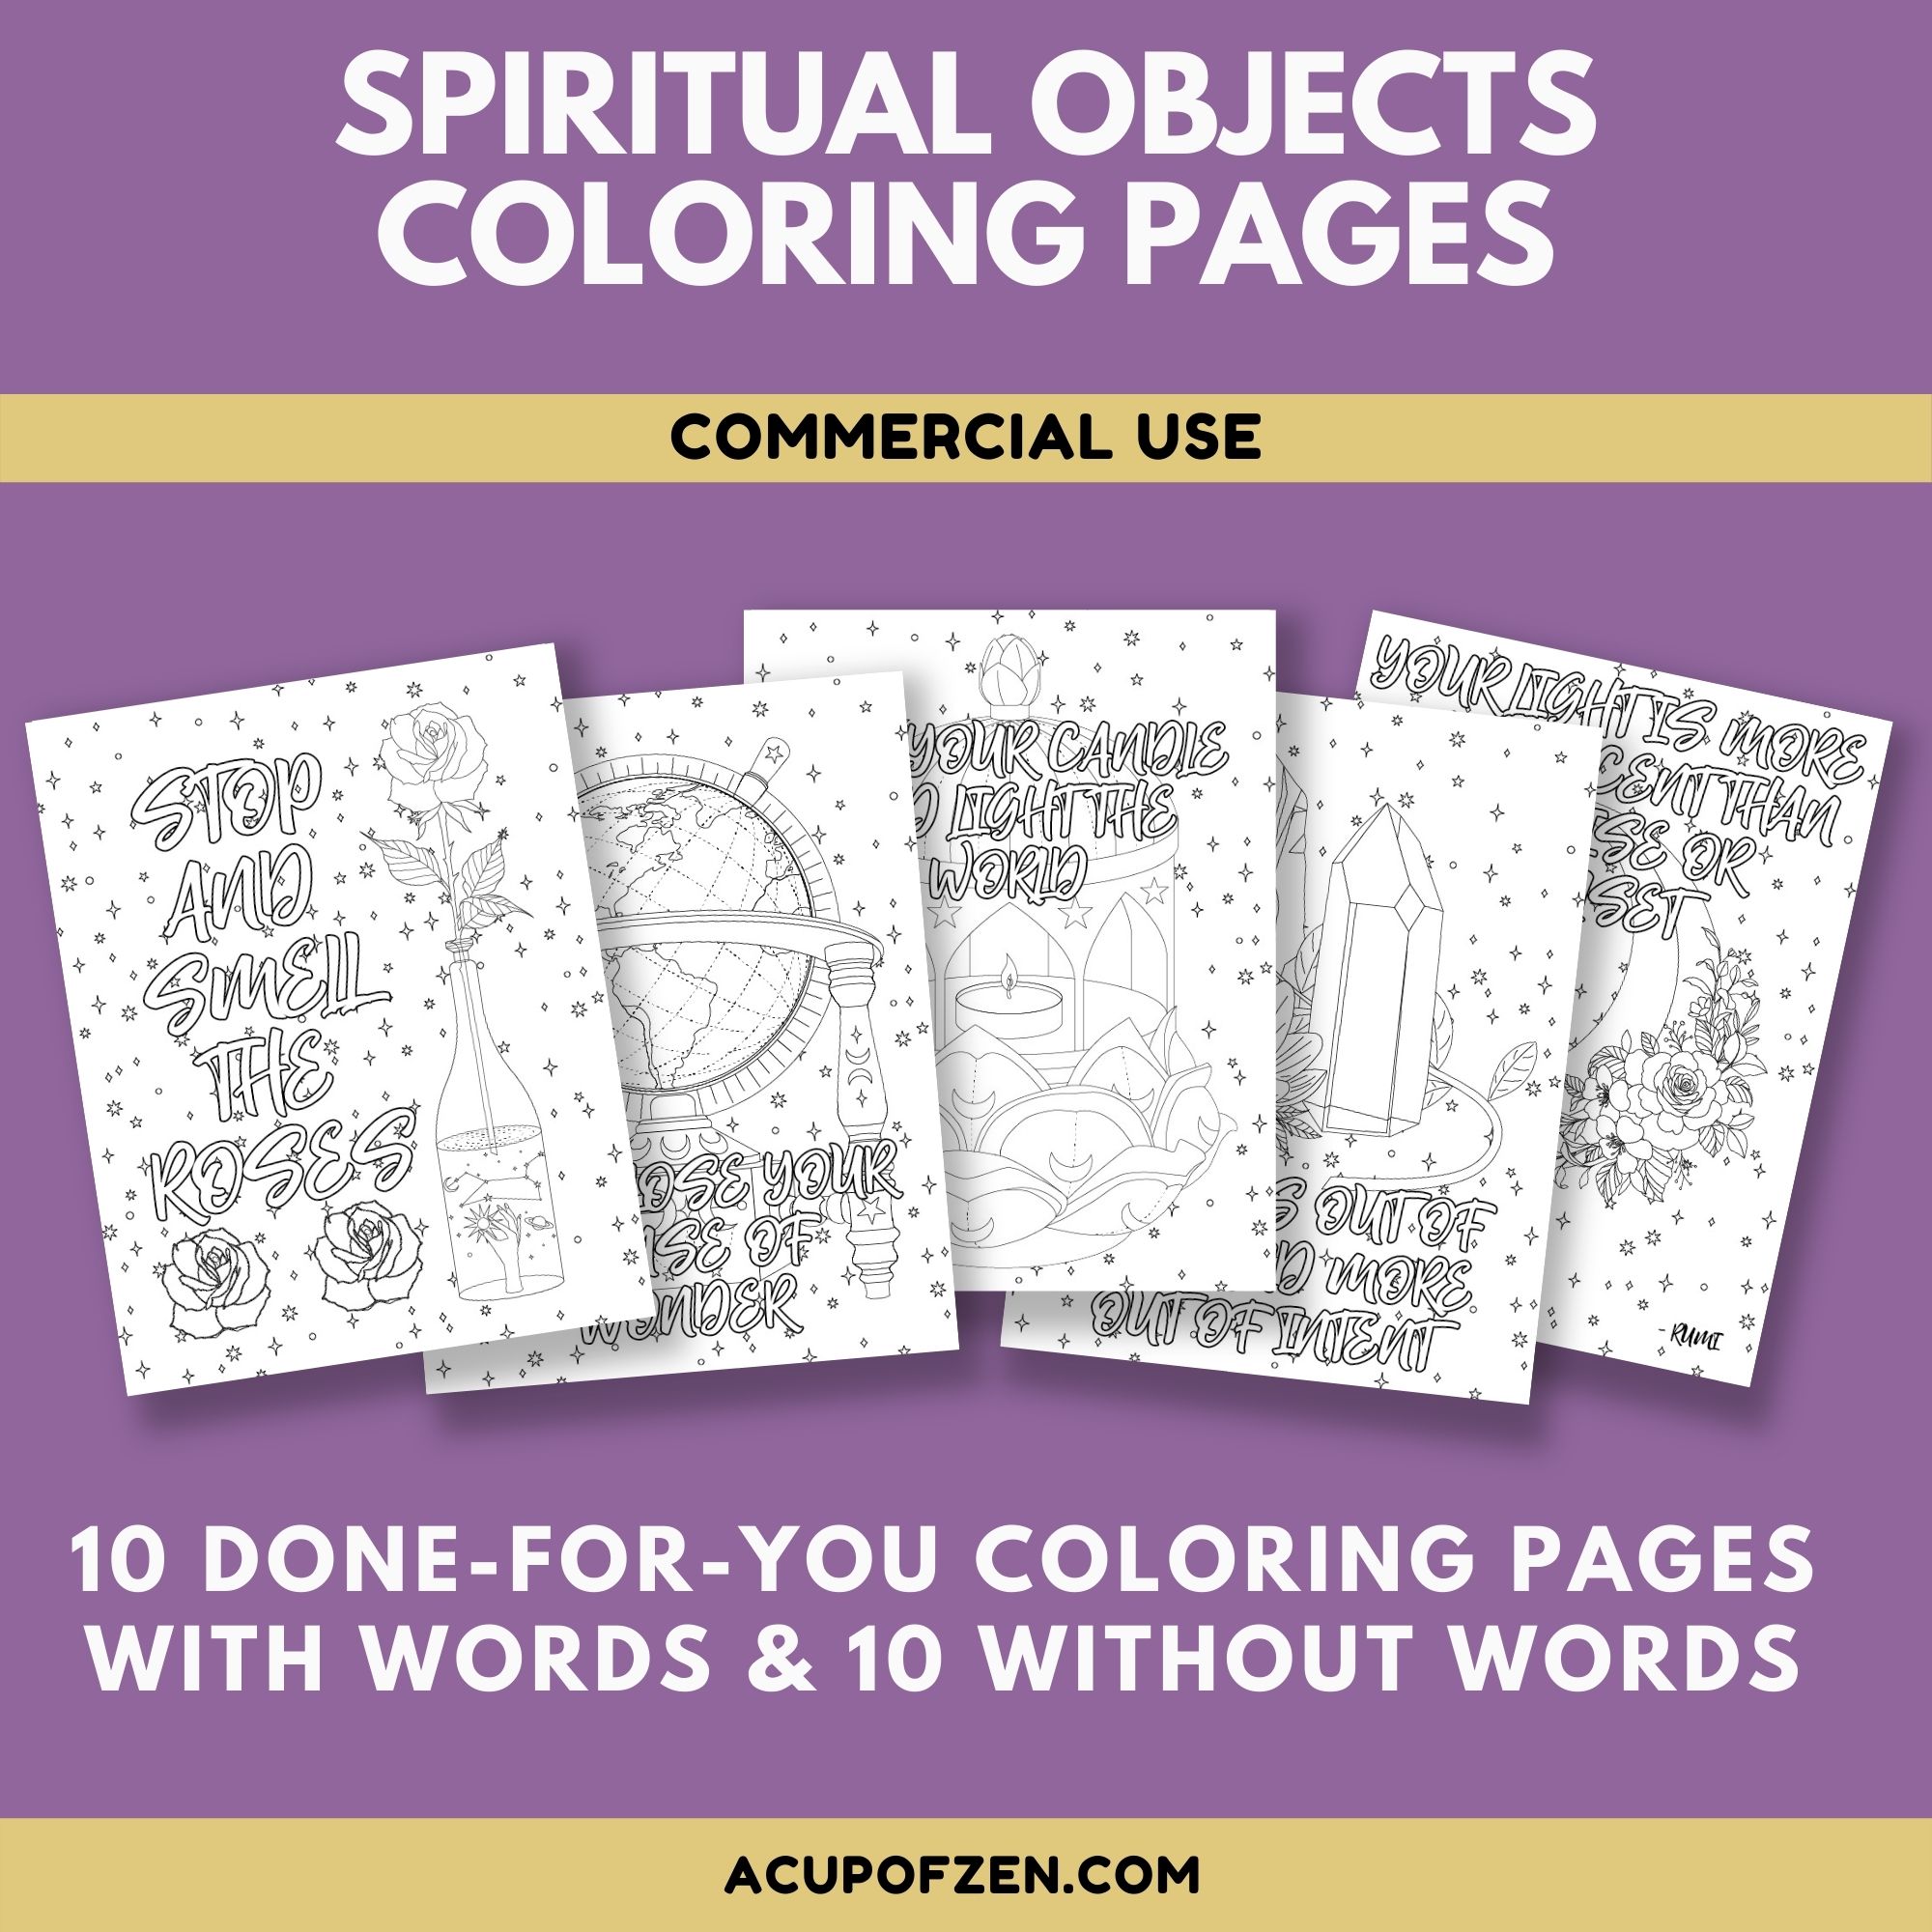 Spiritual Objects Coloring Pages